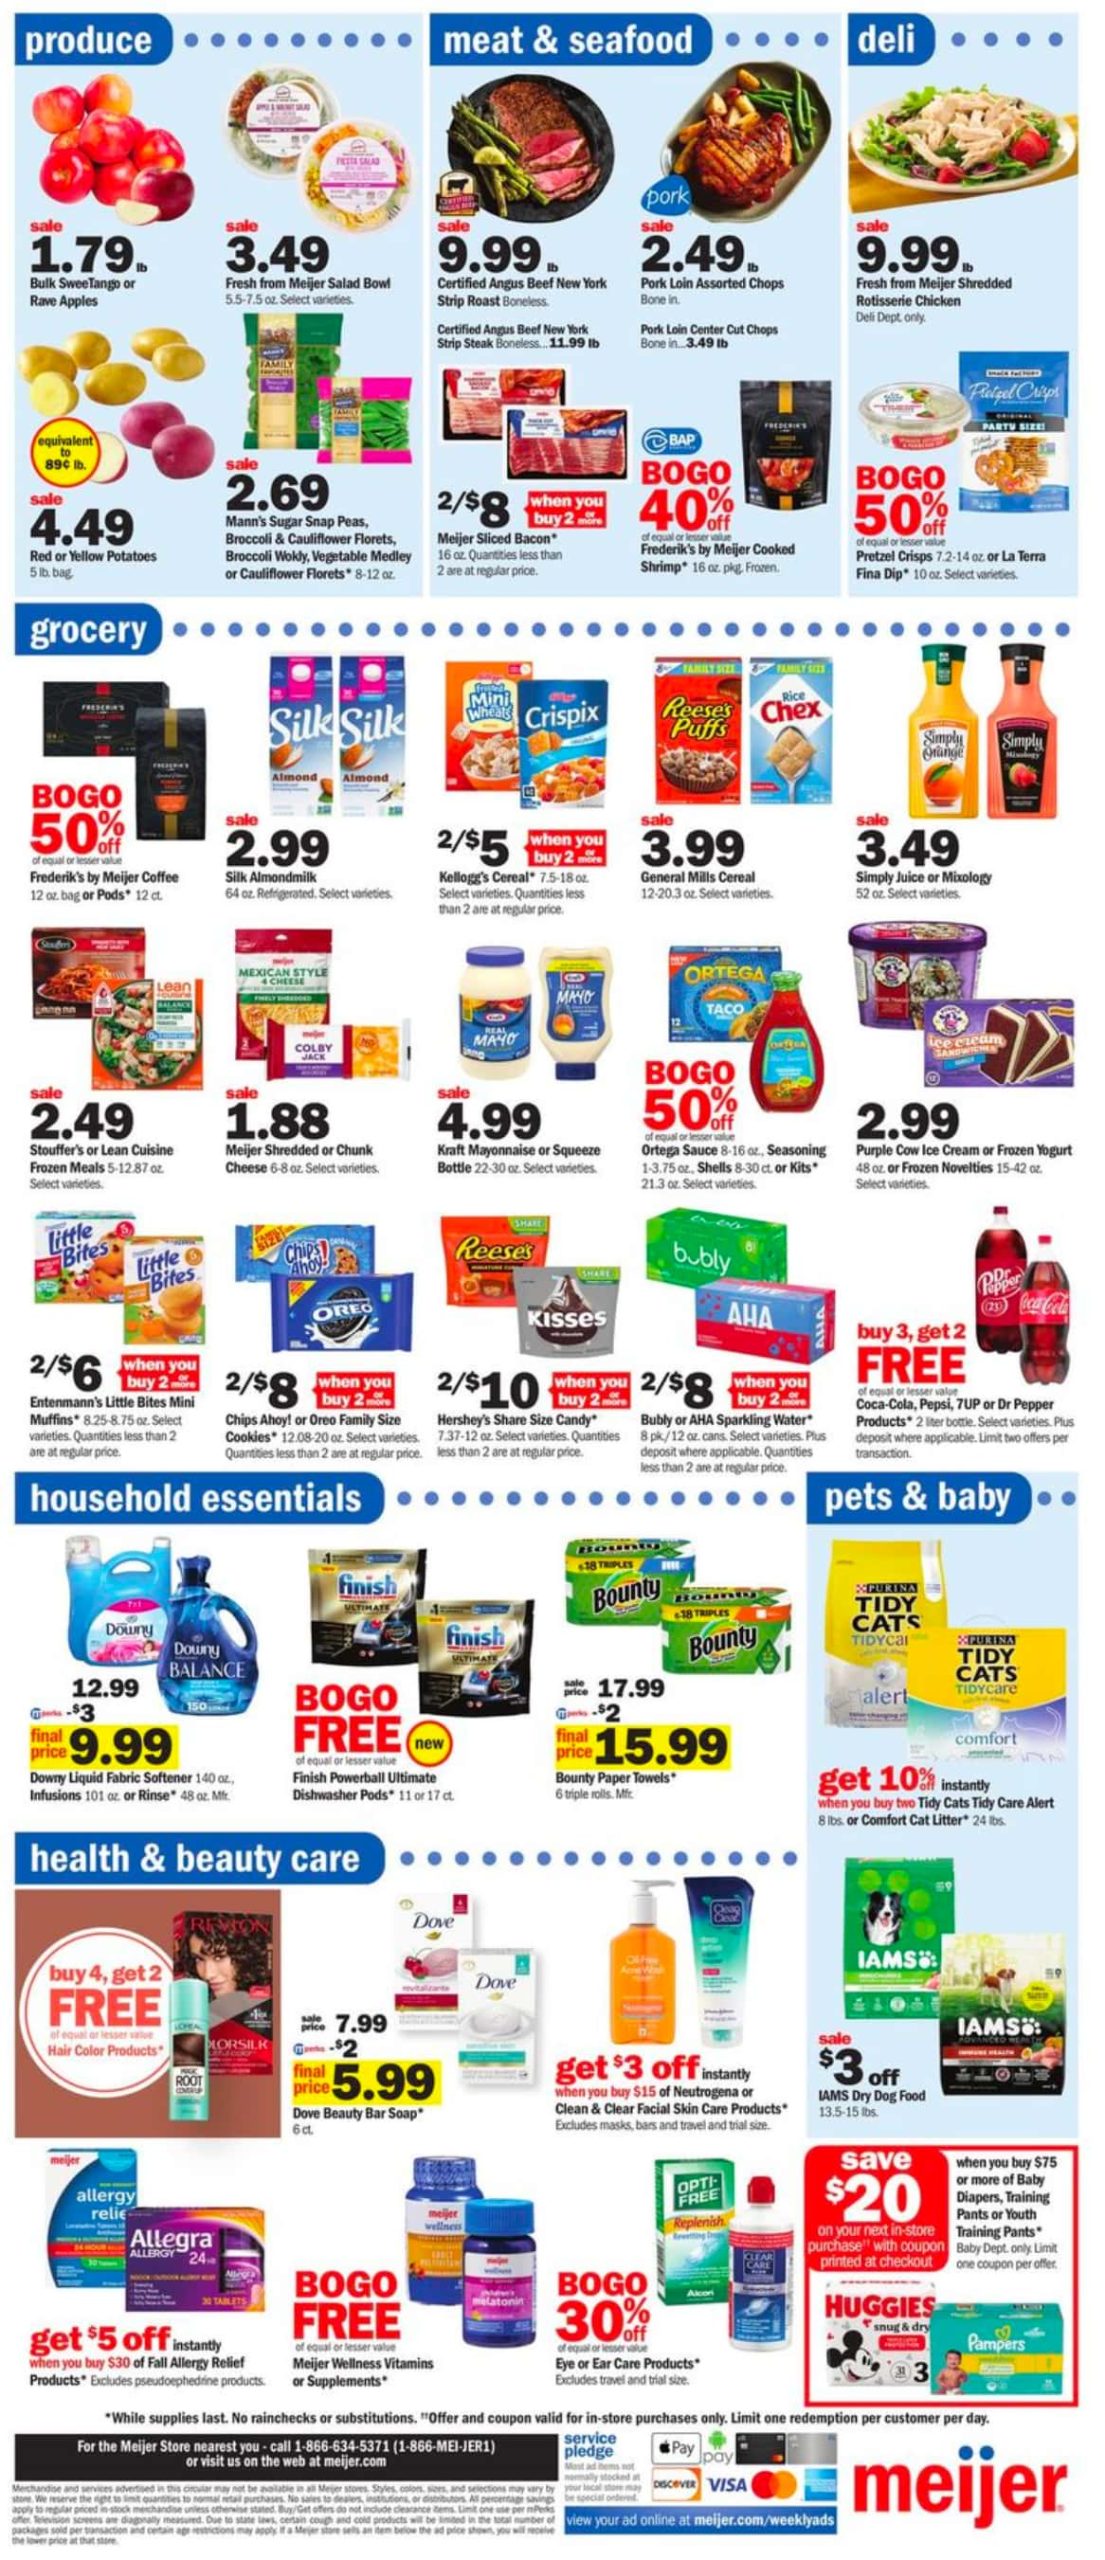 Meijer Weekly Ad May 1 to May 7, 2022 1 – meijer ad 2 scaled